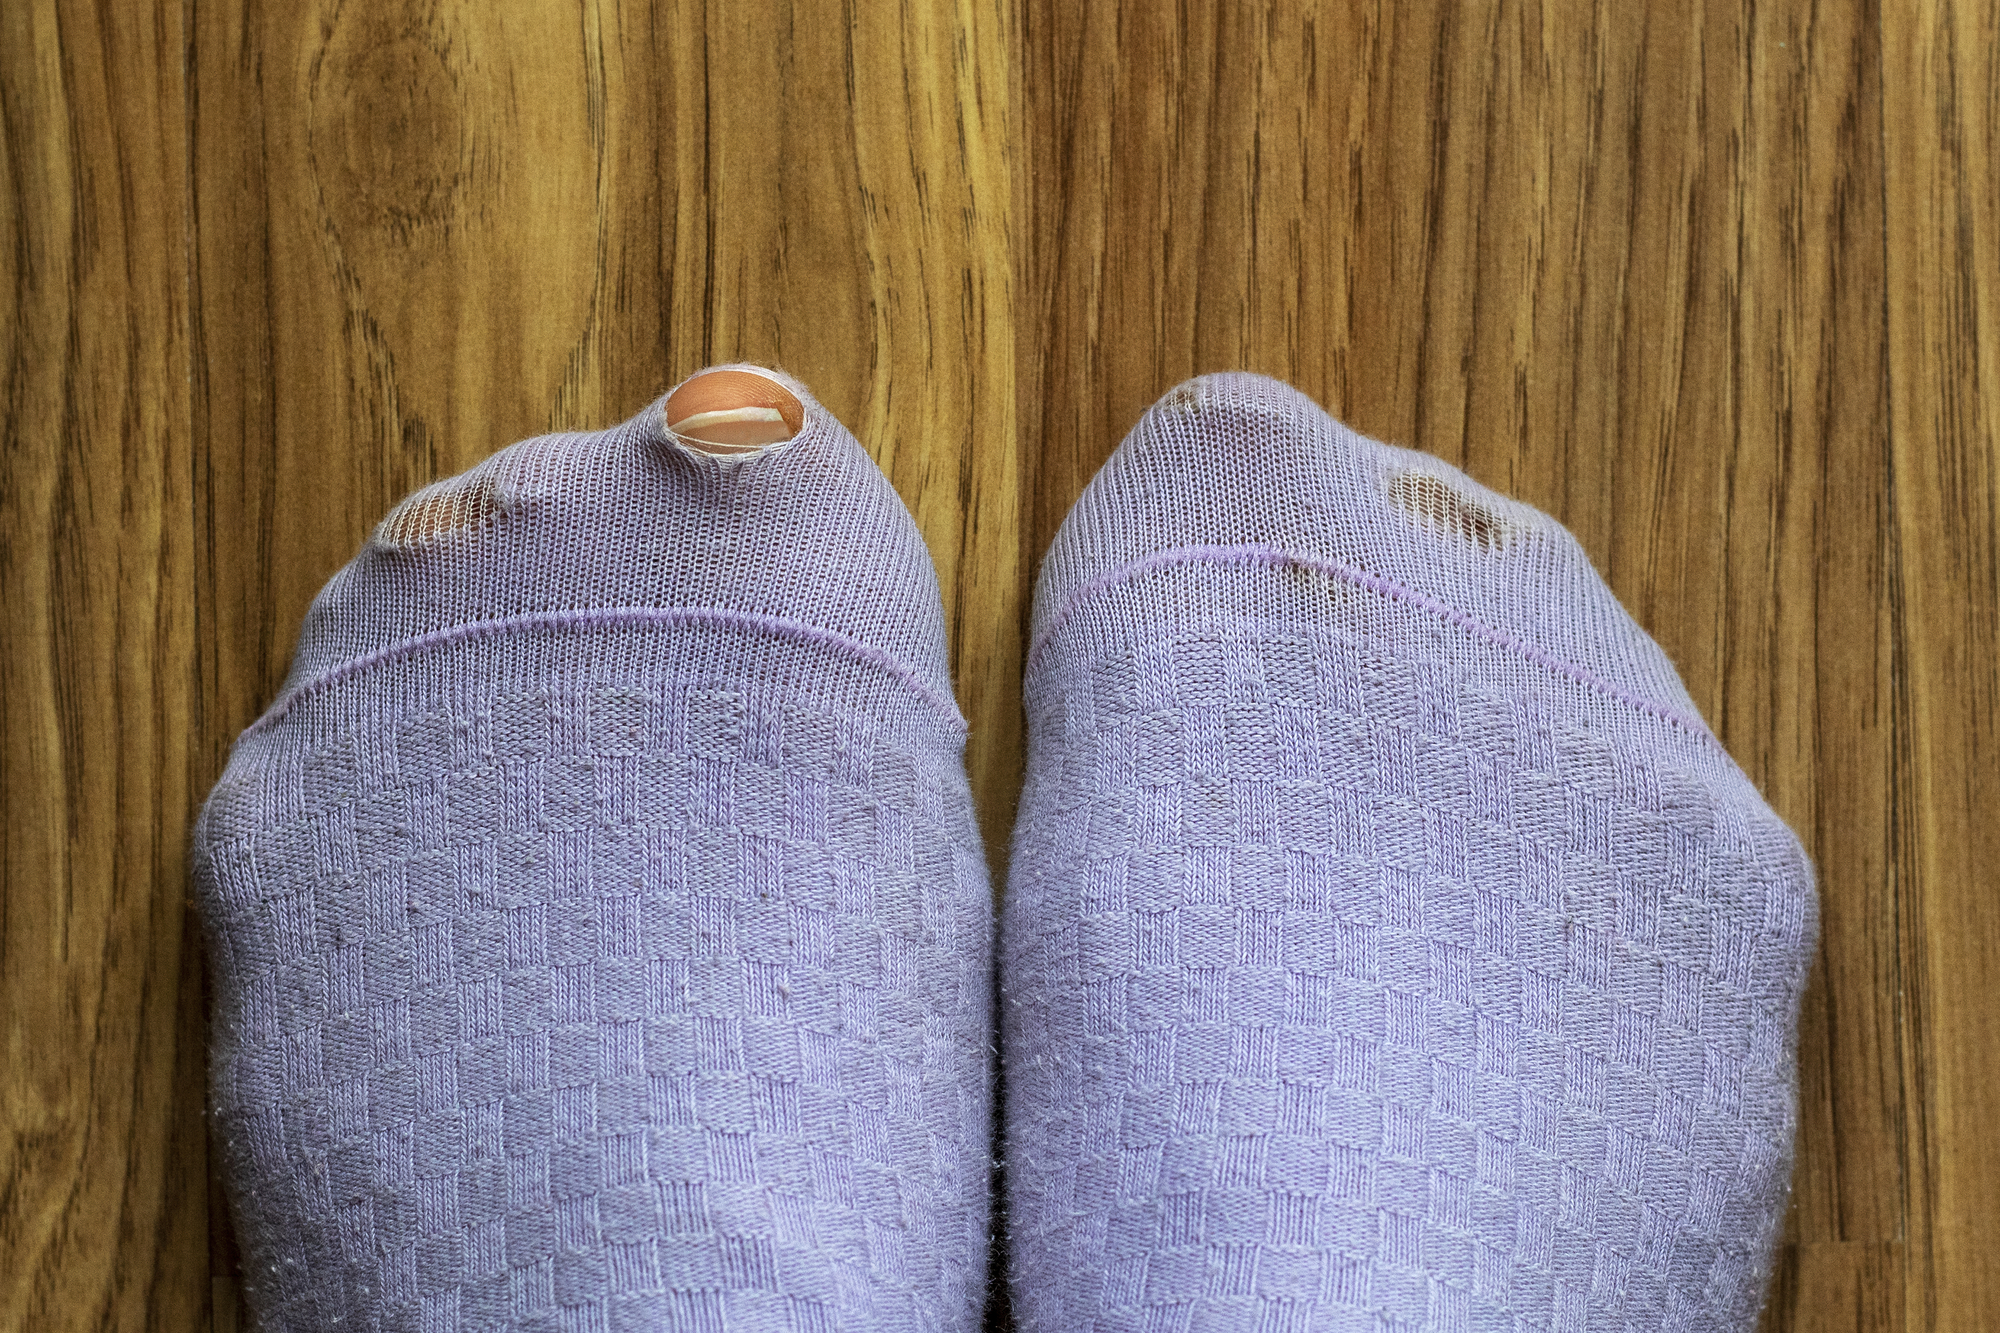 A pair of feet wearing worn-out, light purple socks with holes. The big toe on the left foot is poking through a hole, and the socks are against a wooden floor background.